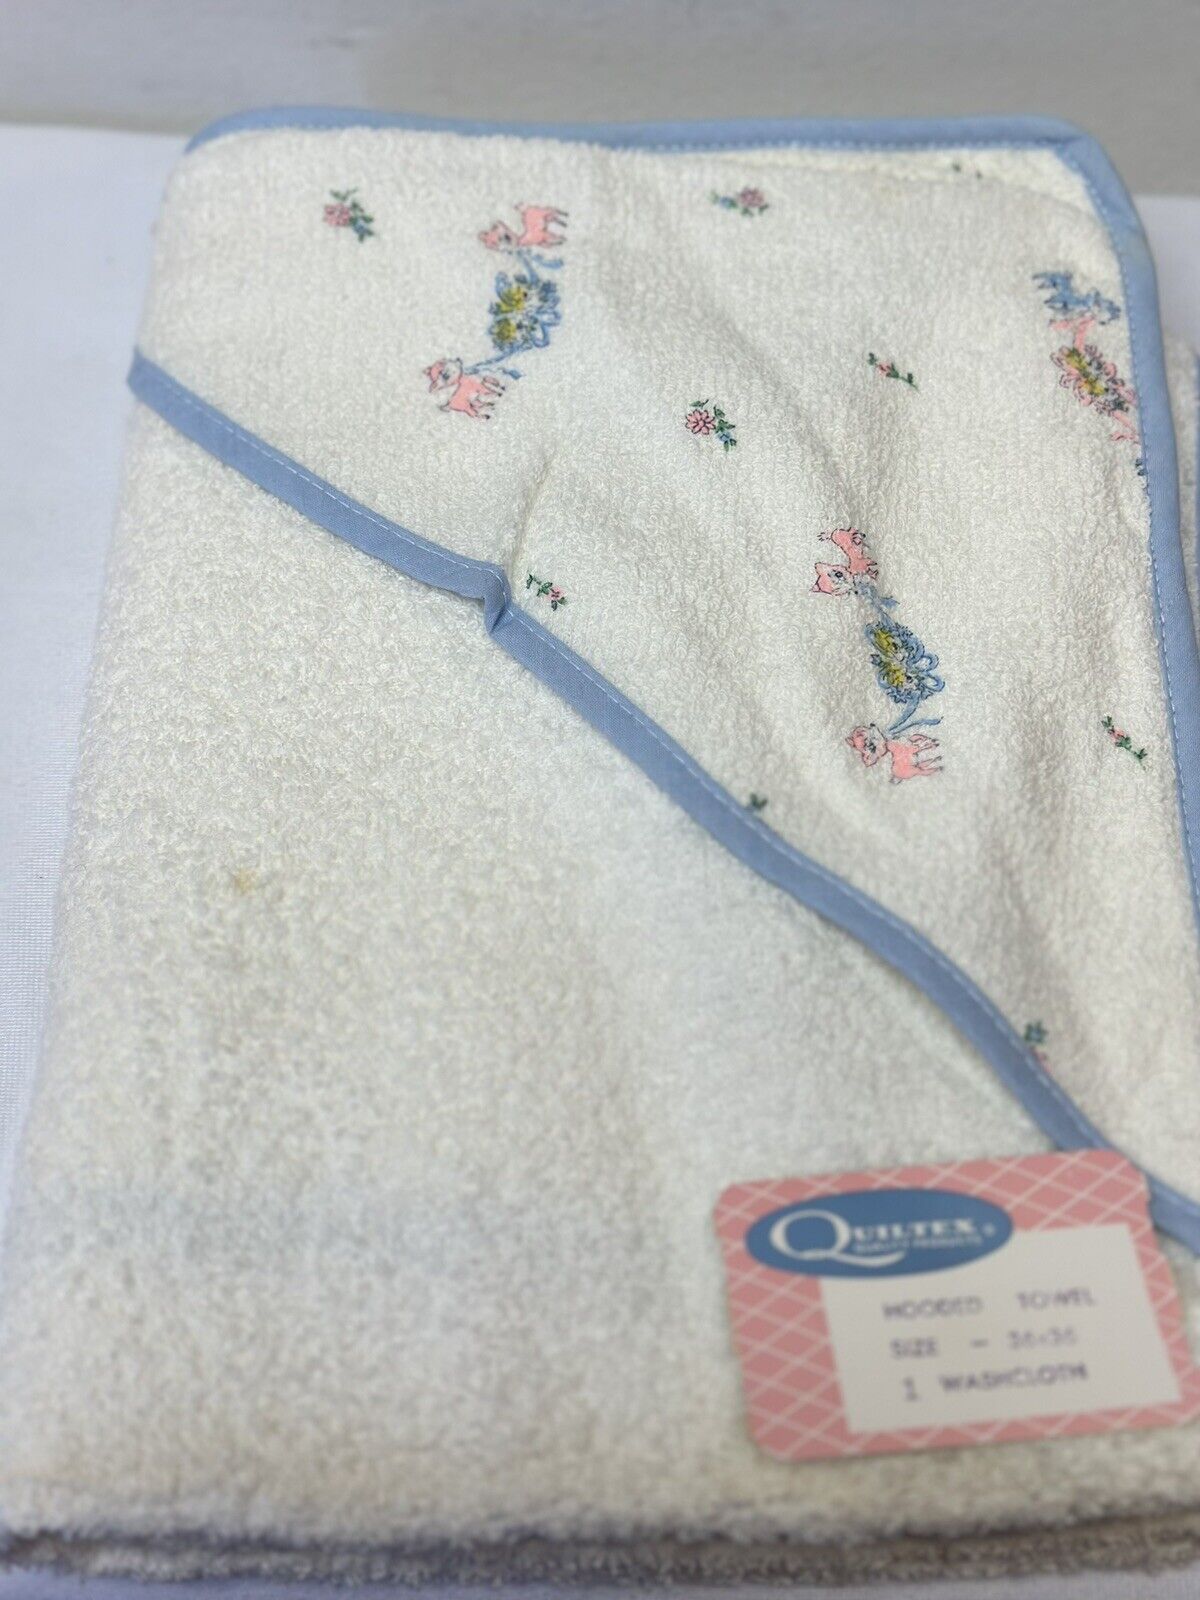 Vintage NOS Quiltex Cannon Terry Cloth Hooded Baby Towel Bath Set Deer Floral